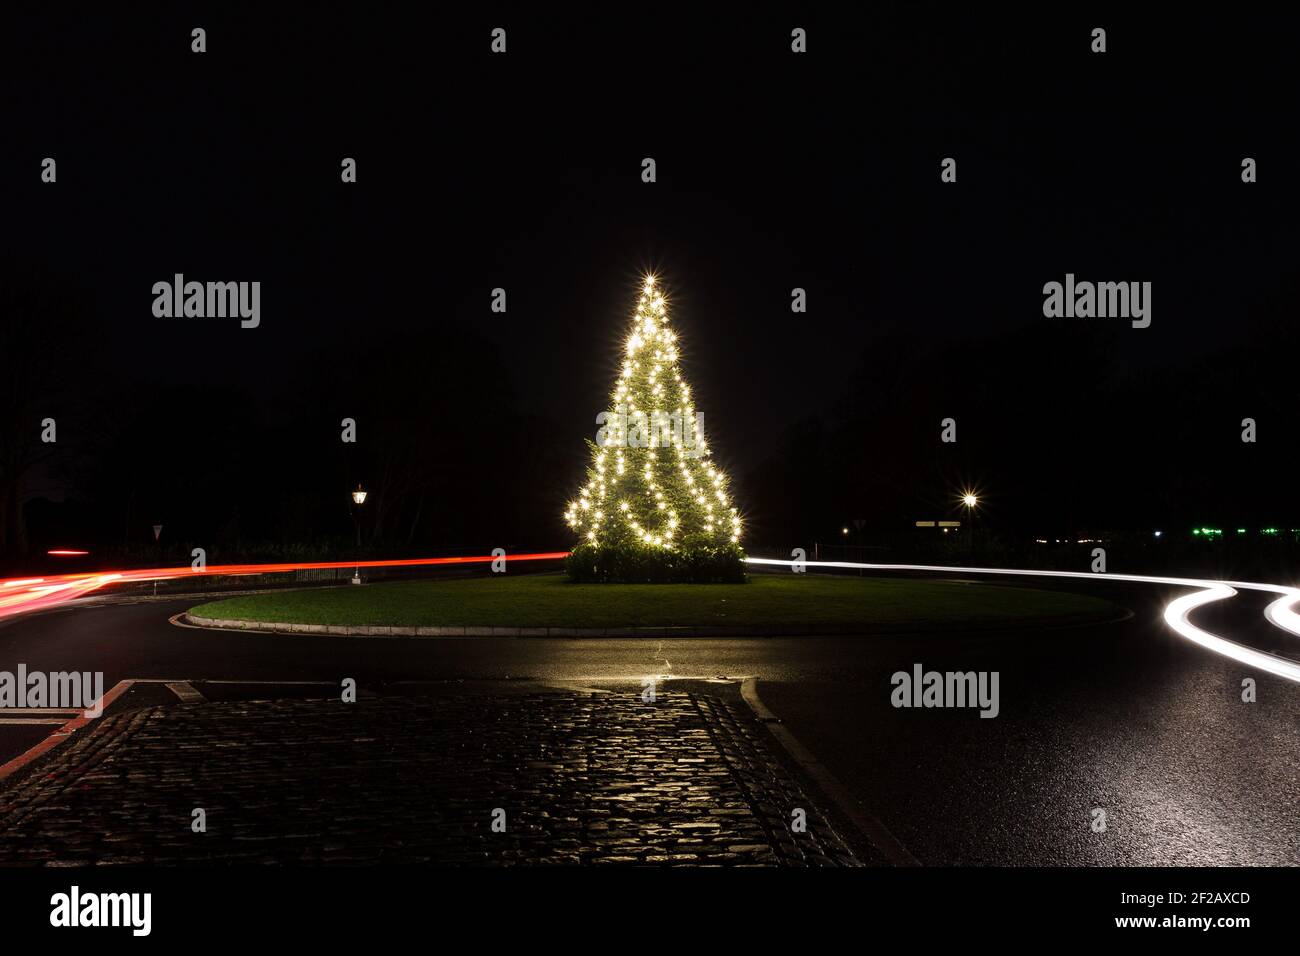 Christmas tree in the Park, Decorated with lights and light trails around, Xmas tree, merry, car light trails, glowing, roundabout, in the center Stock Photo